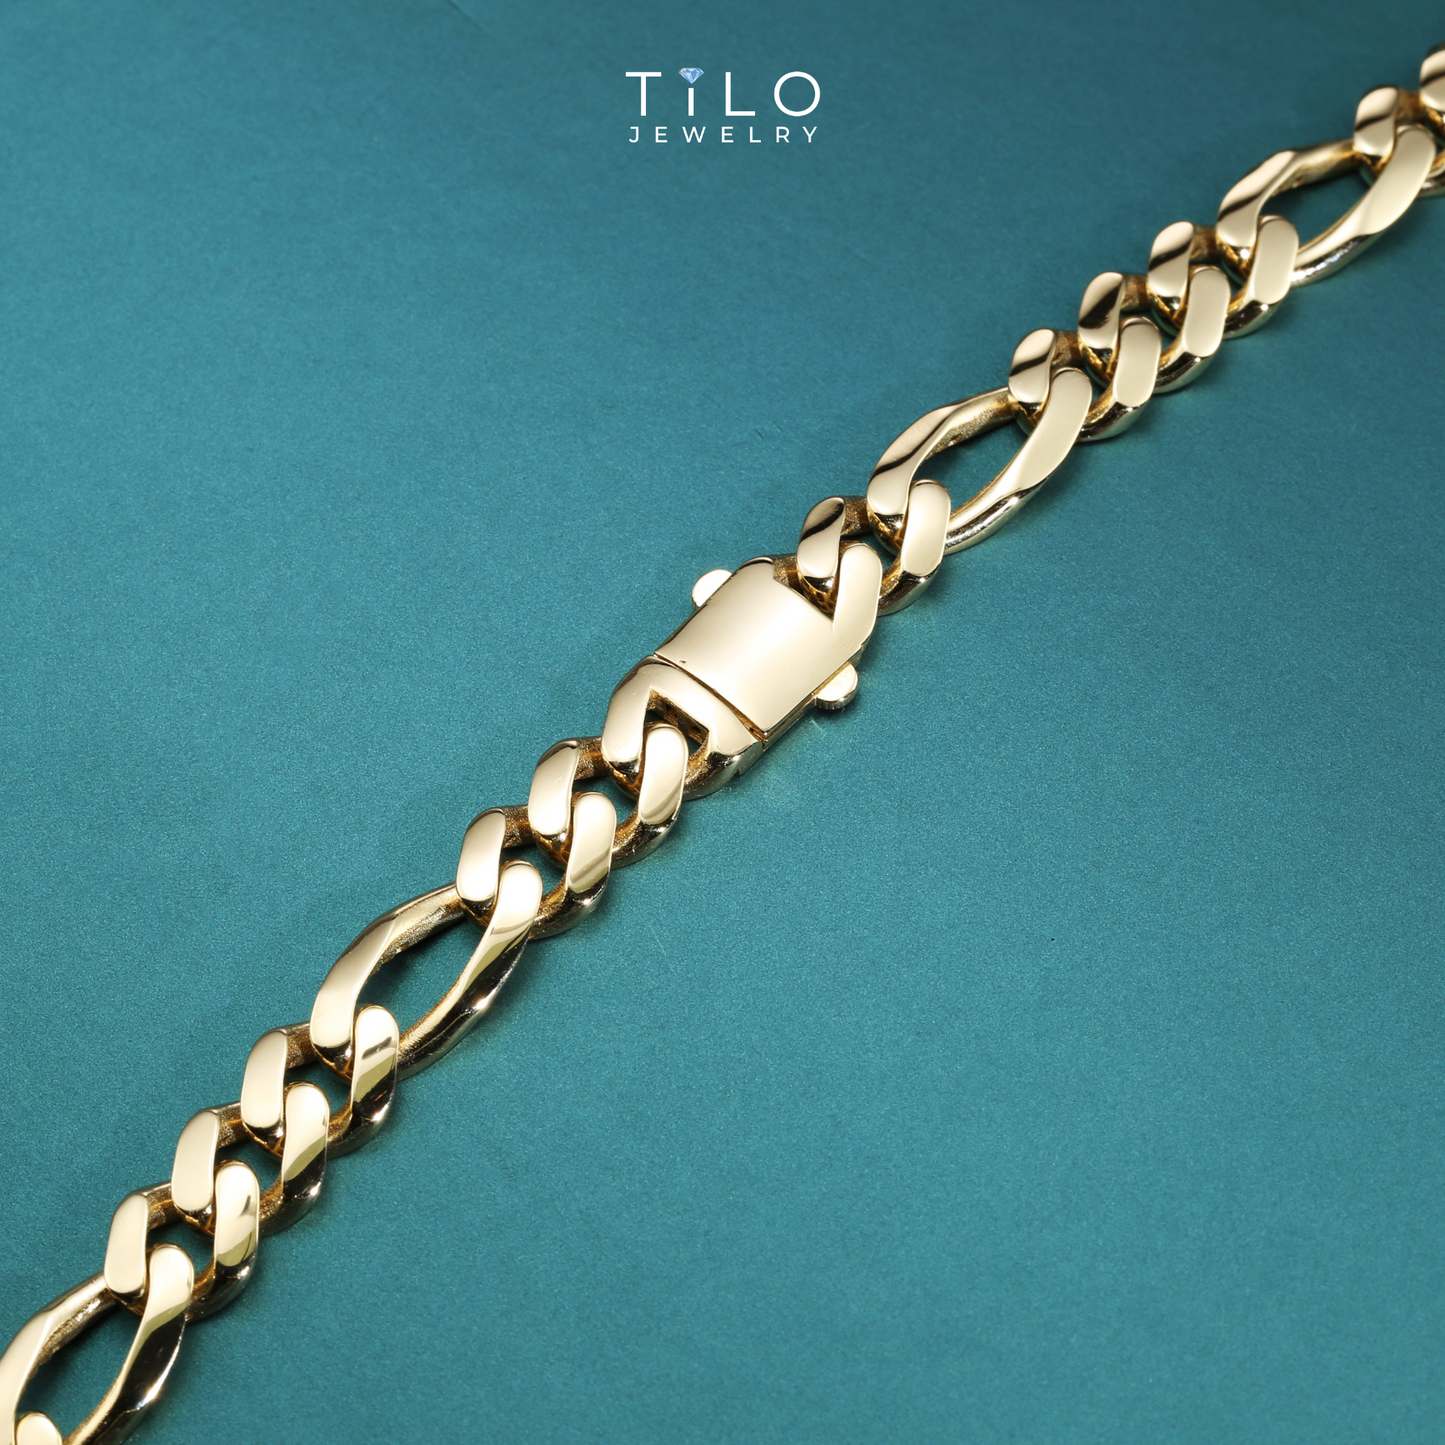 14K Yellow Gold Figaro Link Chain Bracelet, Sizes 7.5in-8.25in, Unisex Design, By TILO Jewelry